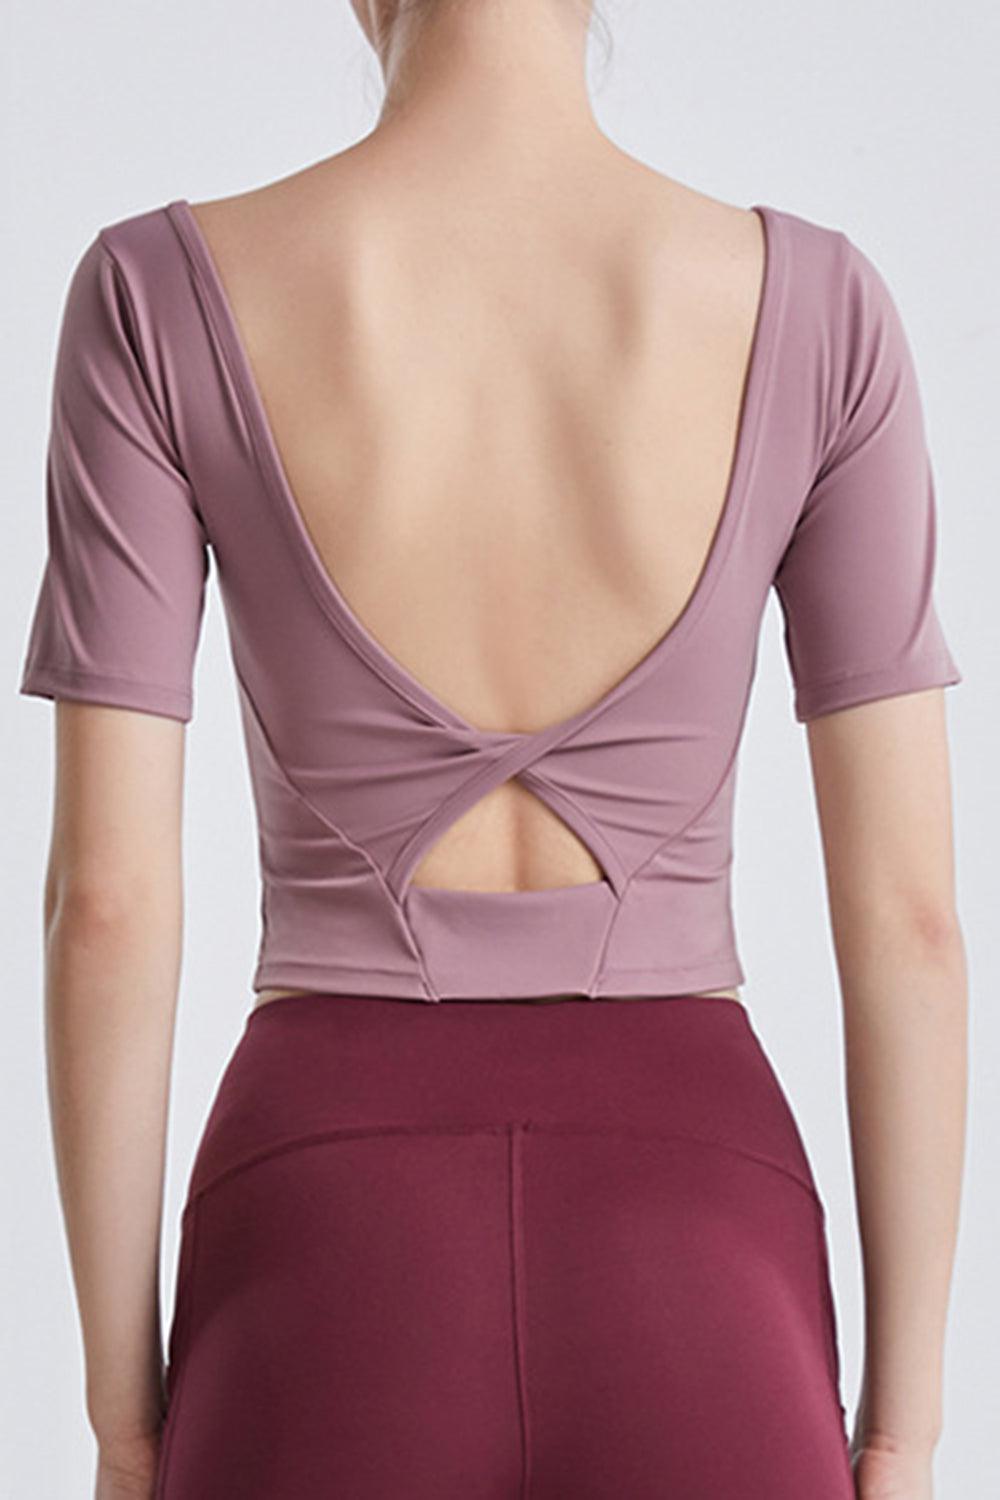 the back of a woman wearing a purple top